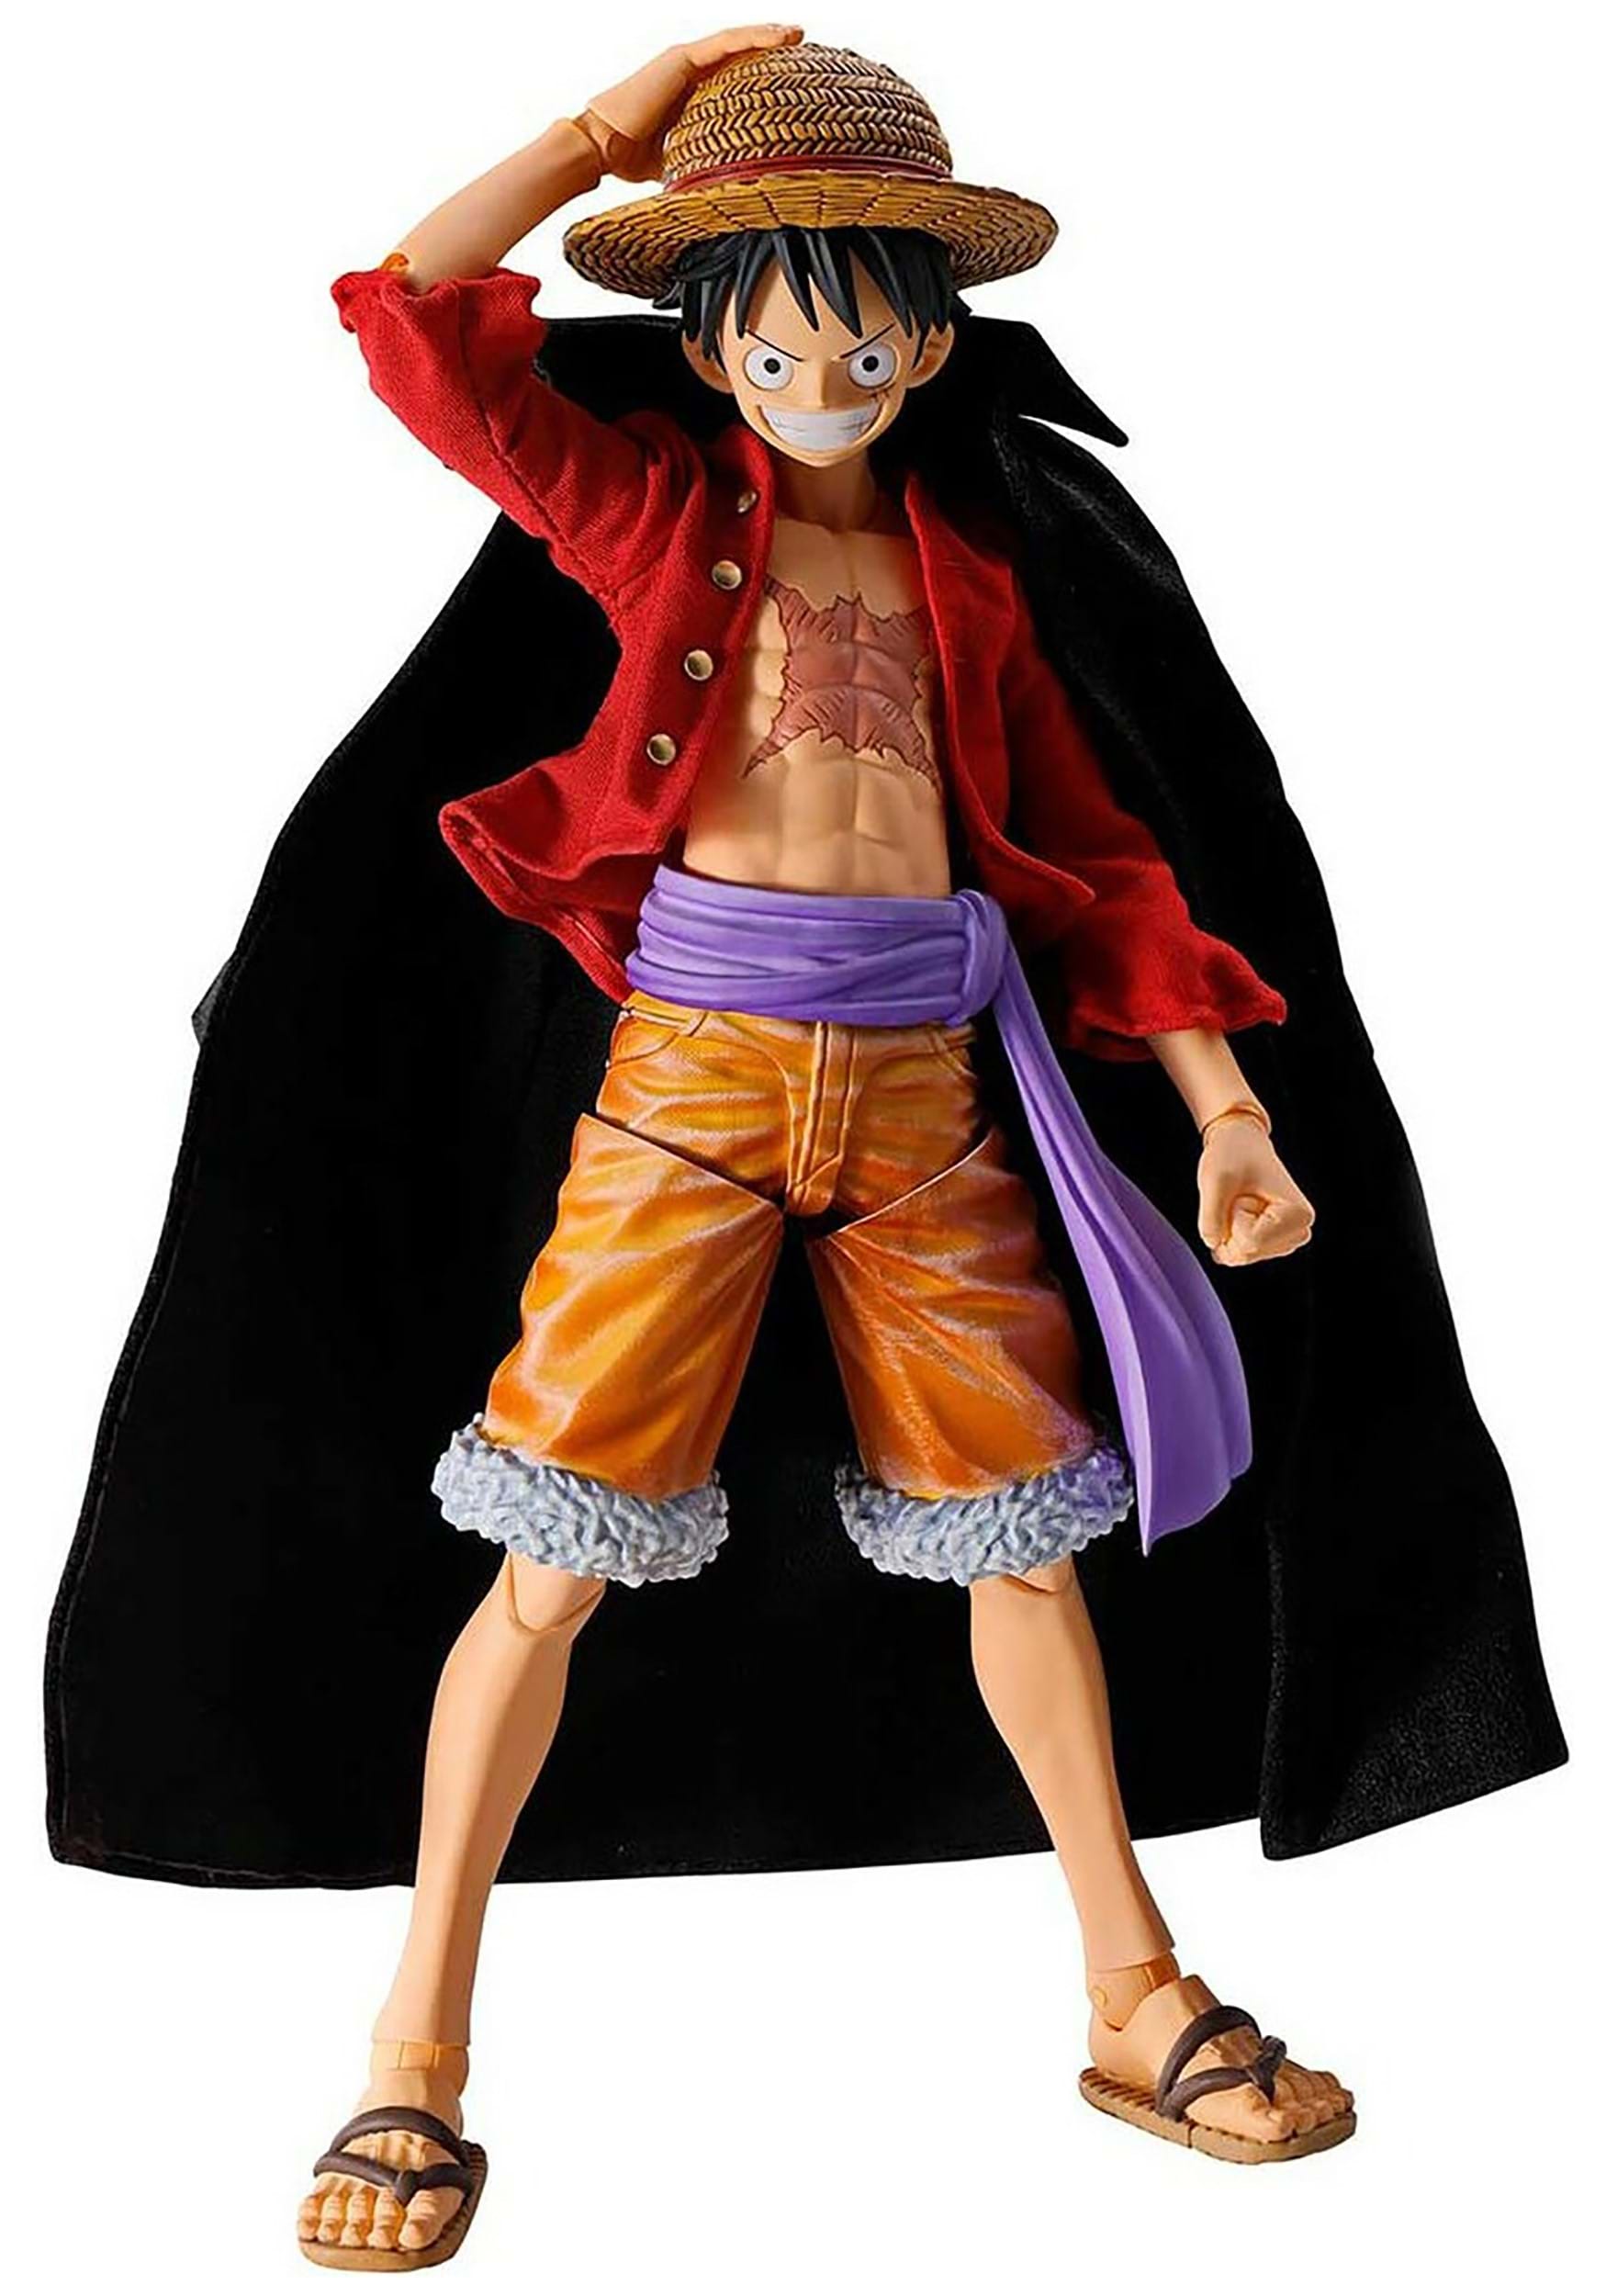 https://images.fun.com/products/82025/1-1/one-piece-bandai-spirits-imagination-works-monkey-d-luffy.jpg